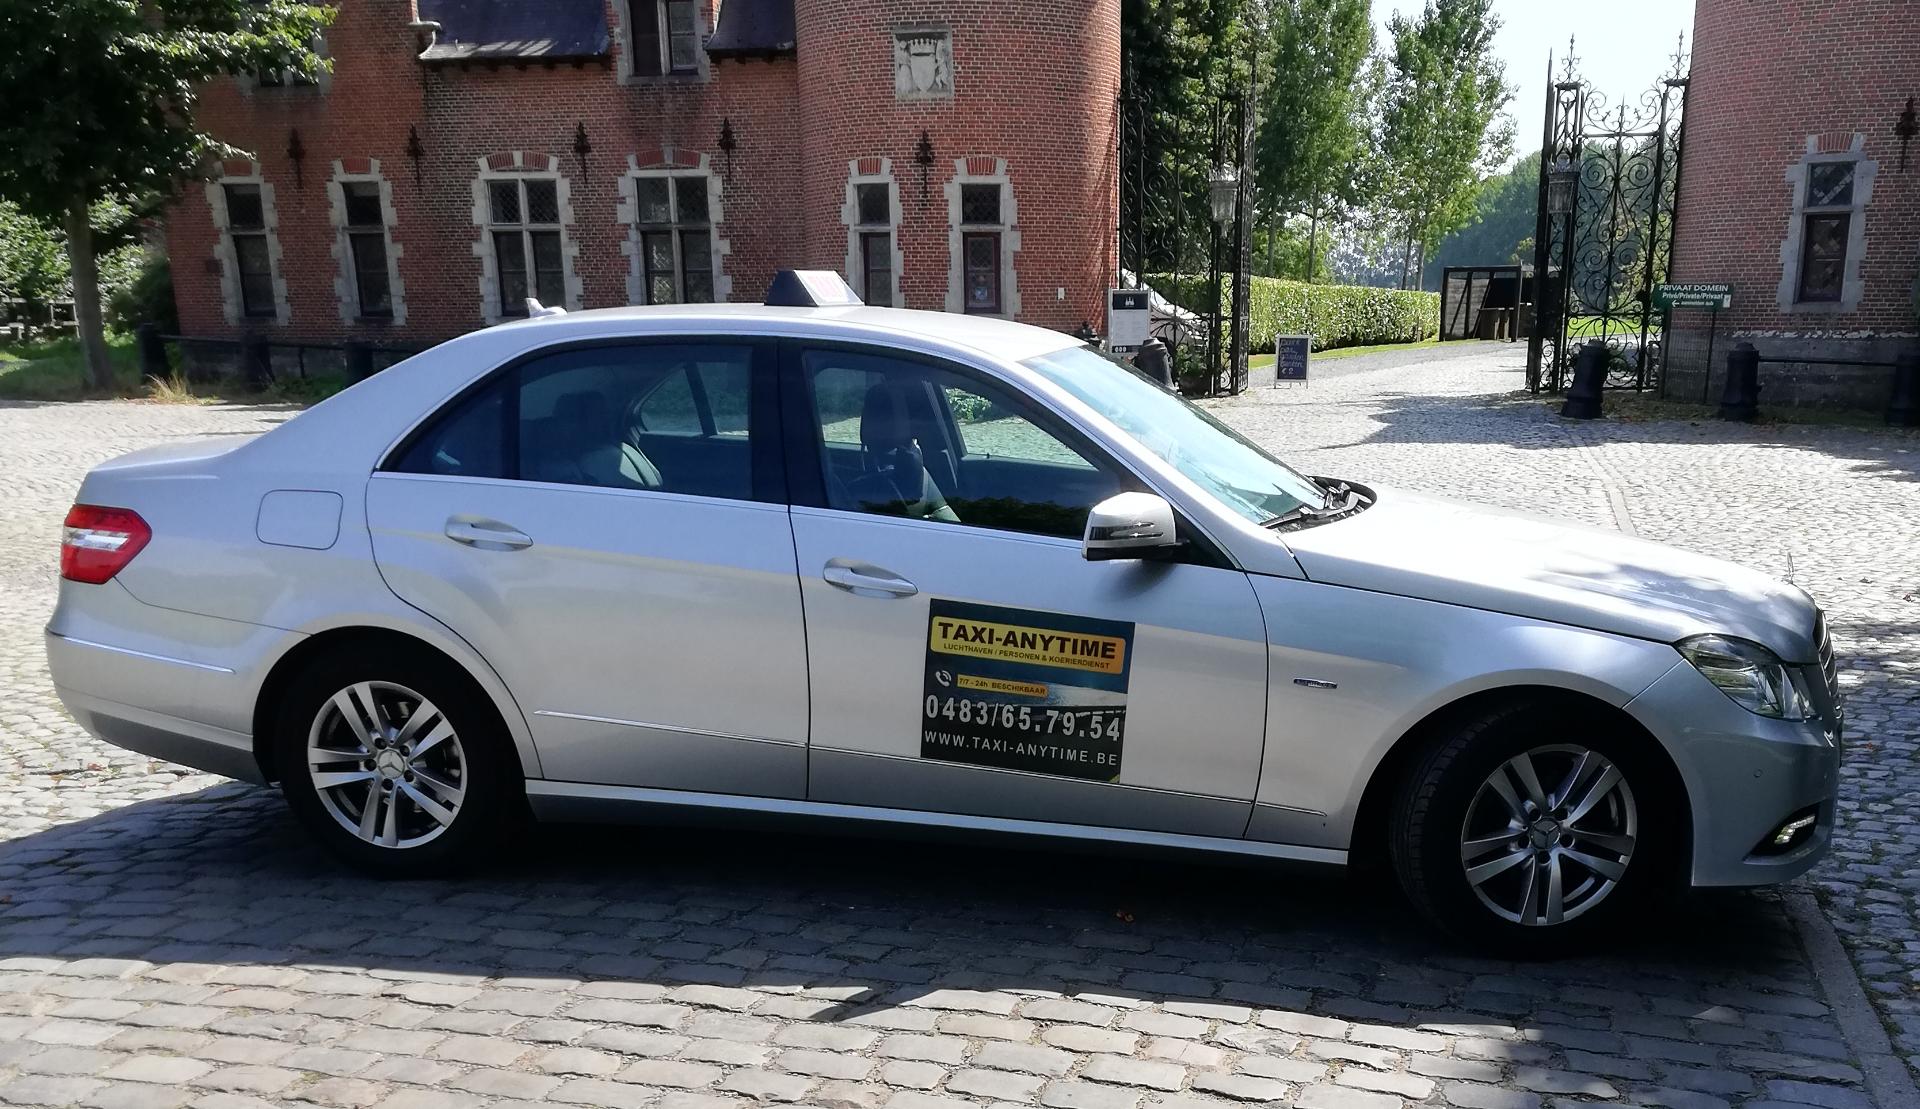 taxibedrijven Oostende Taxi Anytime